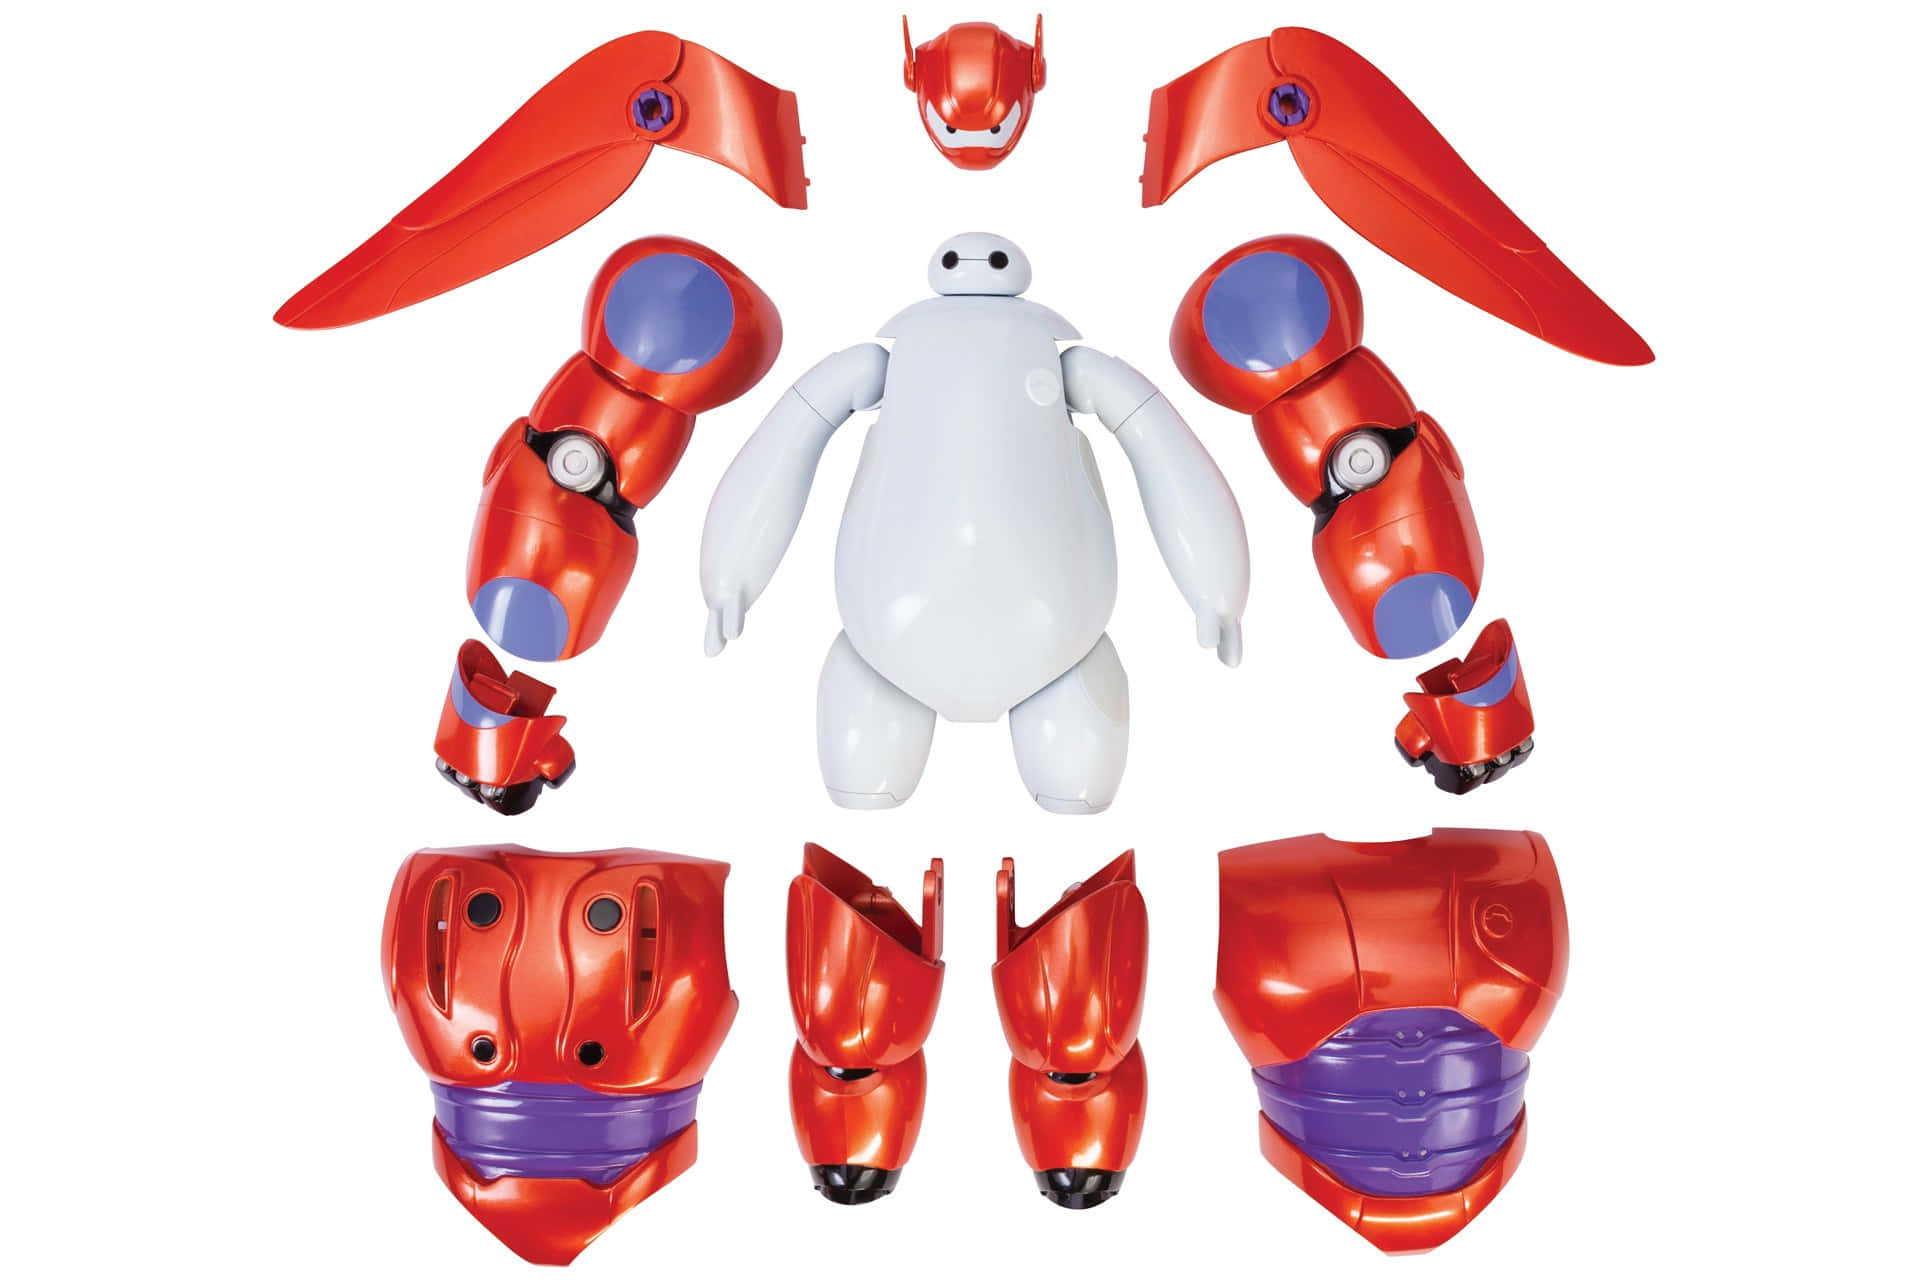 Big Hero 6 - A Red And Blue Robot With A Blue And Purple Helmet